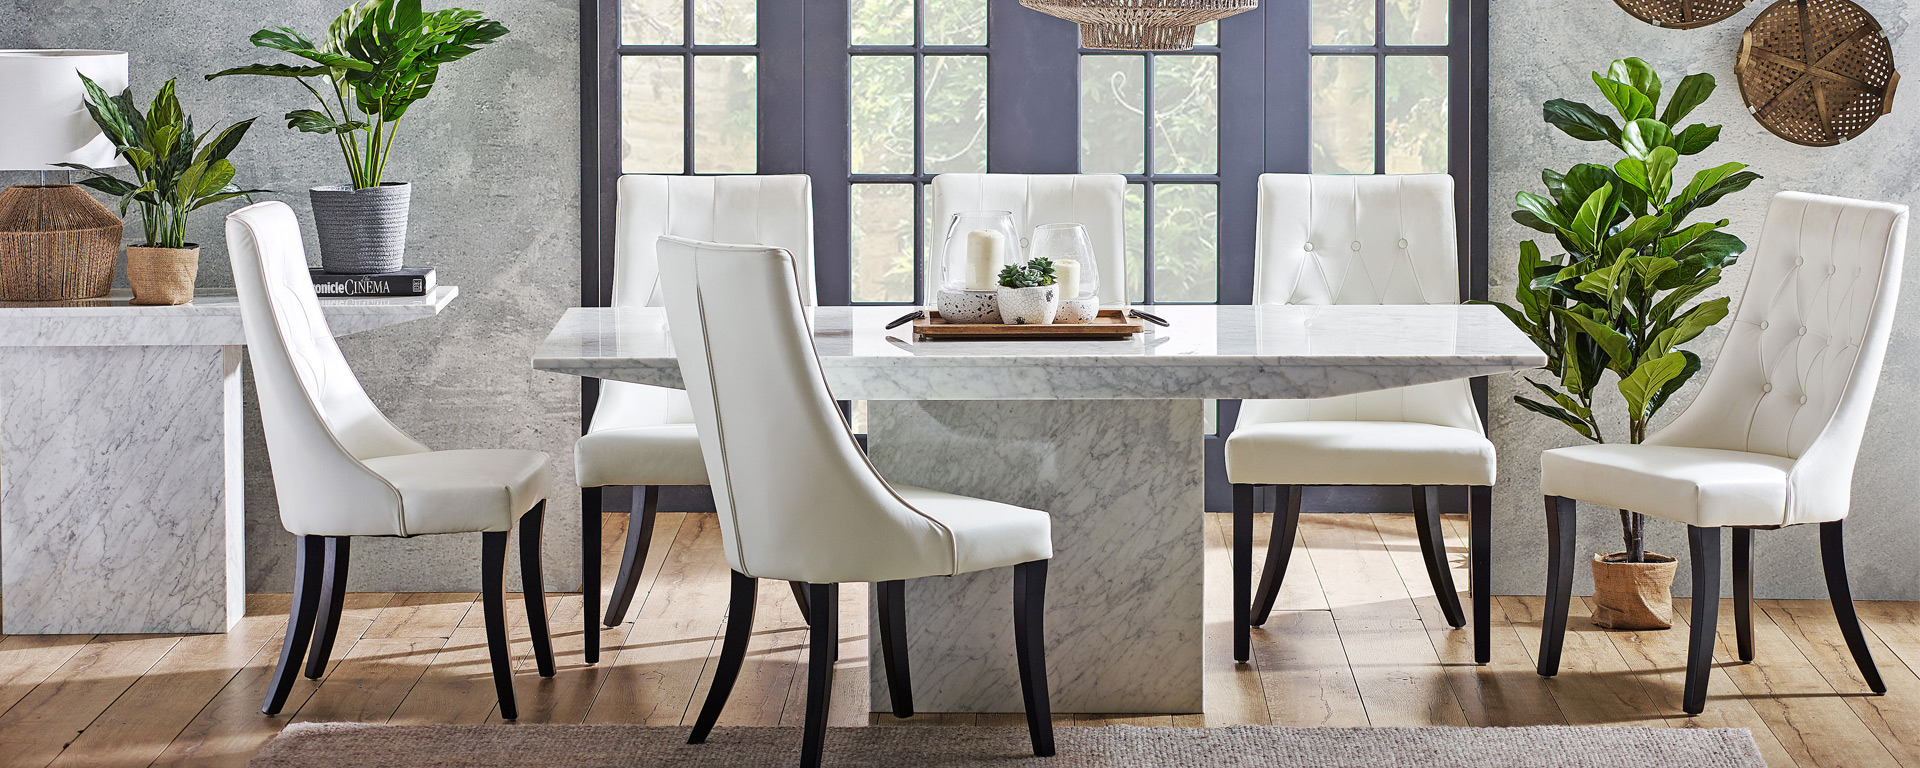 Dining Room Goals 5 Trending Concrete And Stone Dining for dimensions 1920 X 768